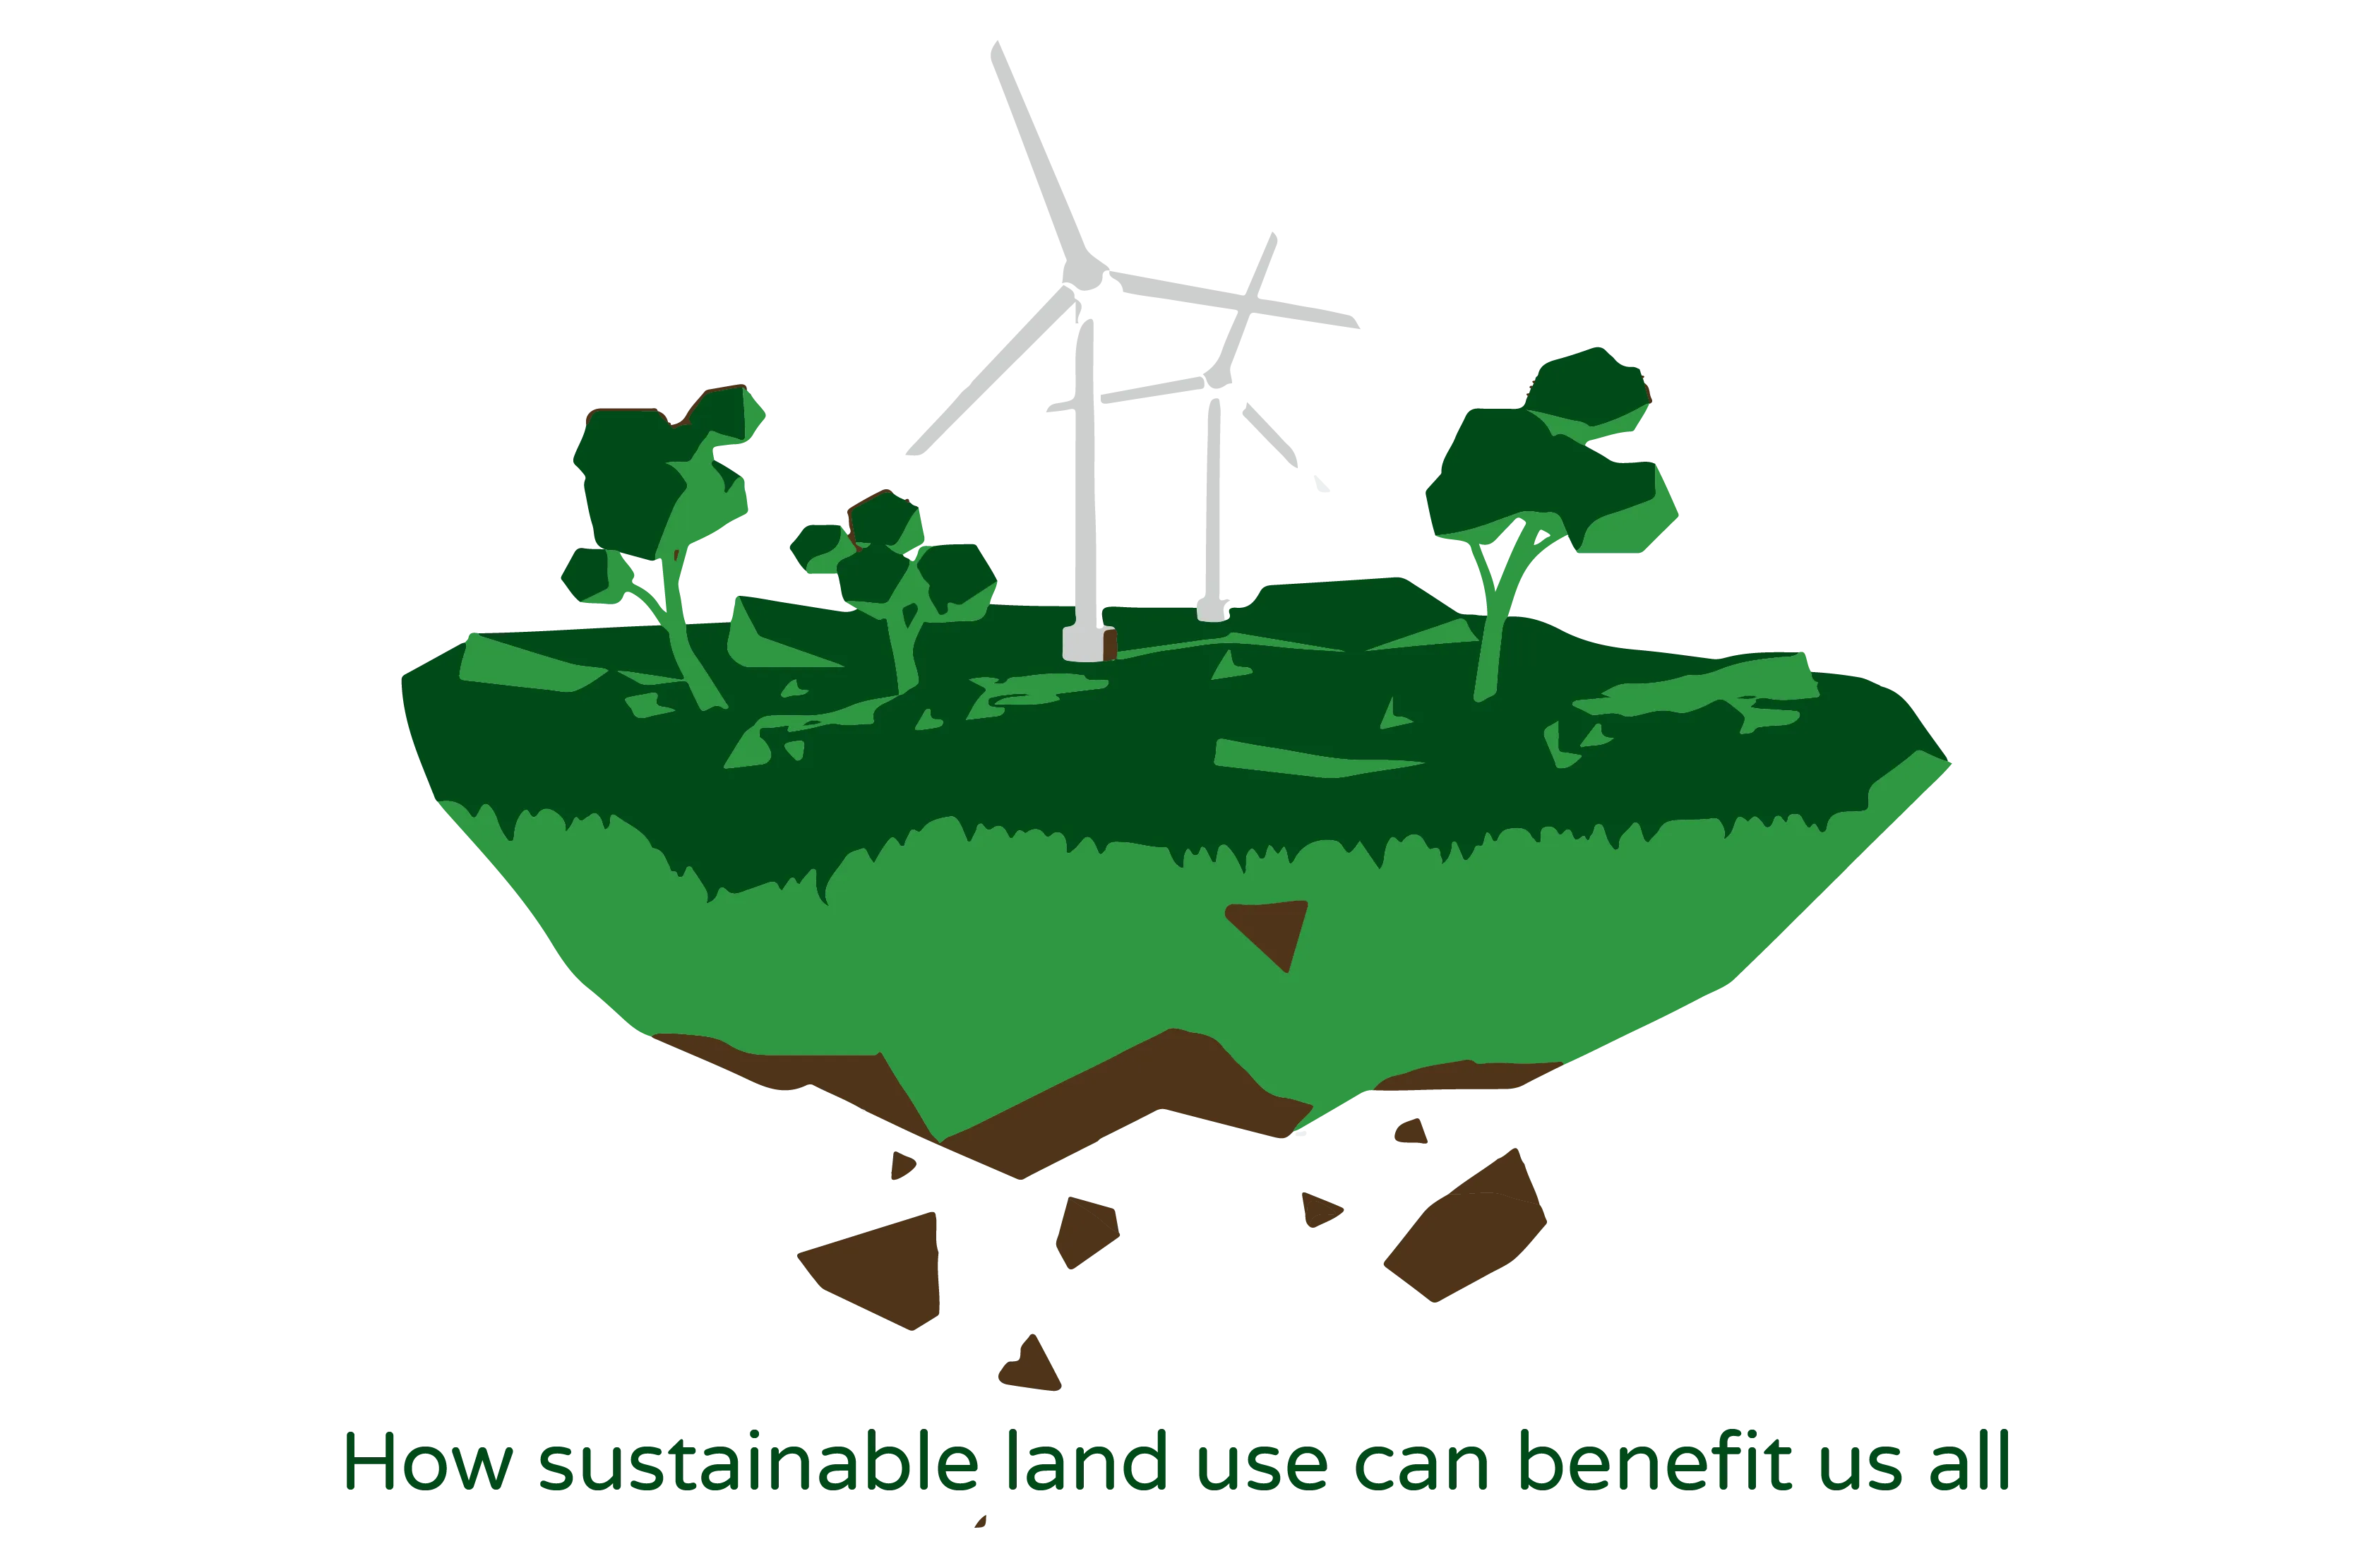 Illustration depicting a piece of land with trees, green grass, and windmills. The illustration also shows the underground wellness of the soil. The image showcases the concept of sustainable land use, with healthy vegetation, renewable energy generation through windmills, and a representation of the healthy soil ecosystem. It conveys the potential benefits of sustainable land use practices, including environmental conservation, carbon sequestration, and soil health.